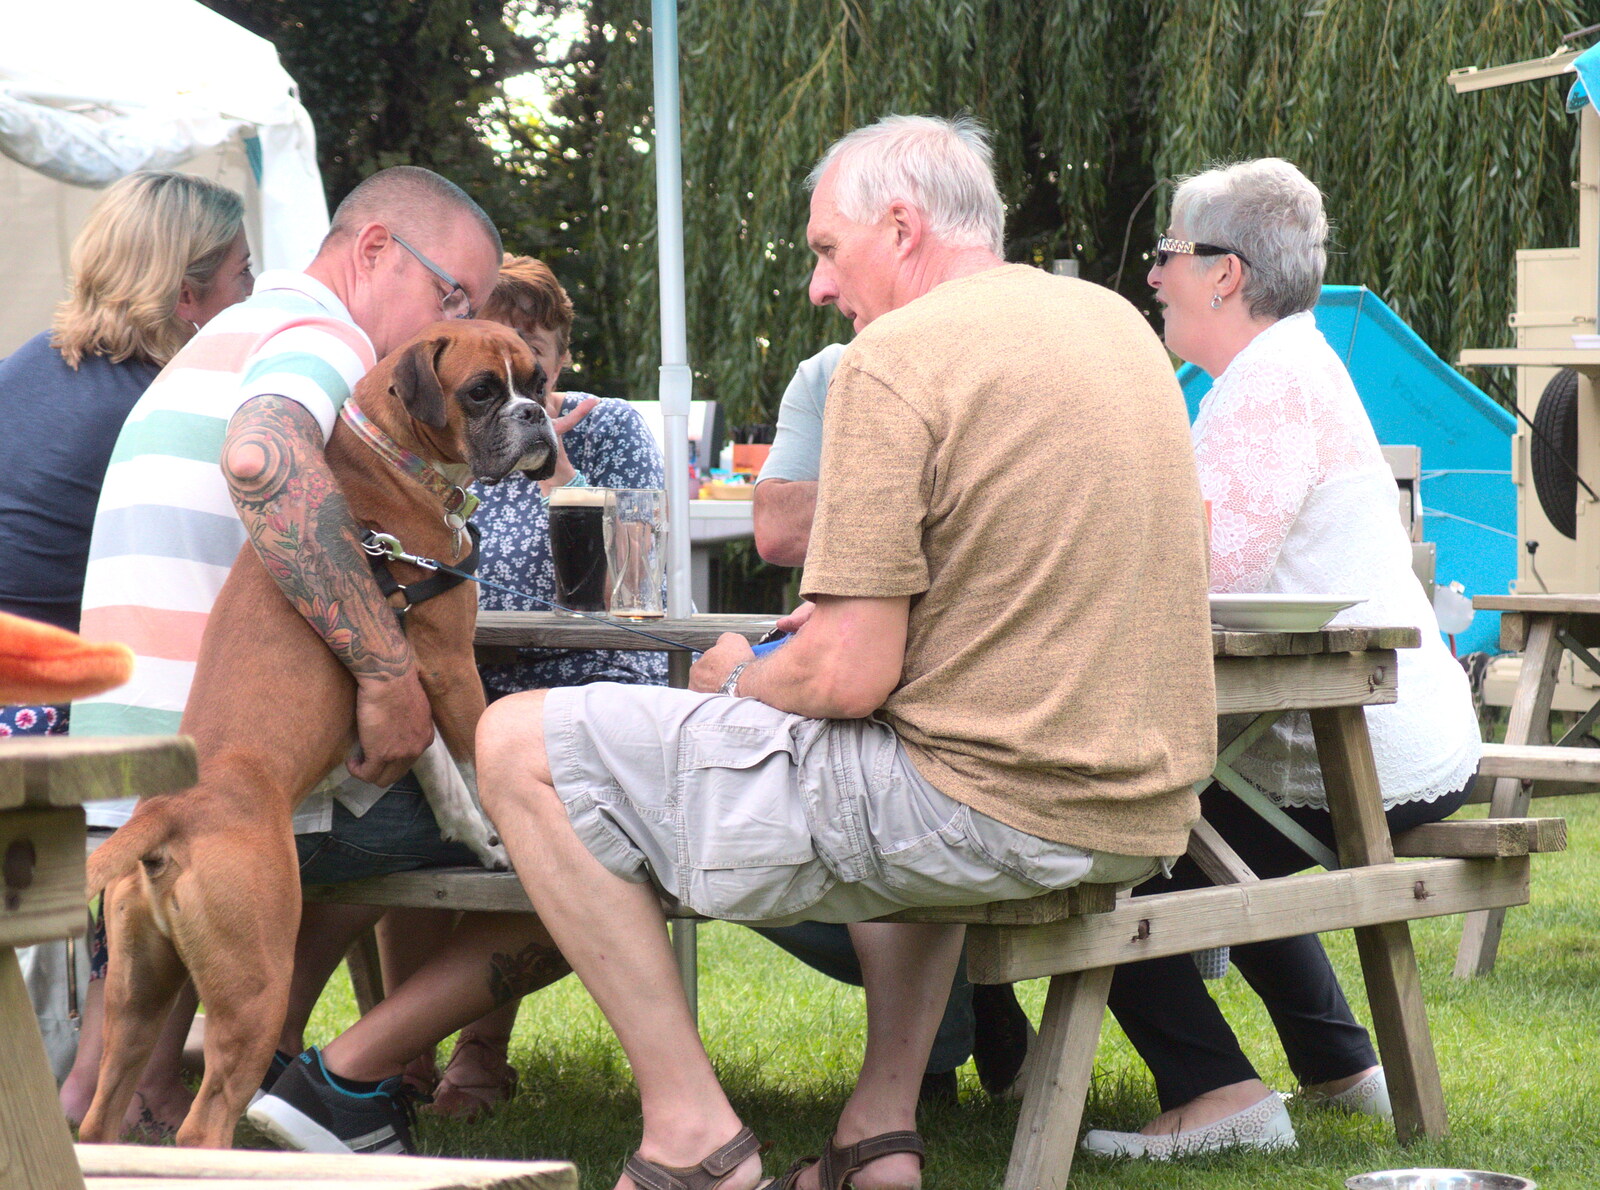 A boxer dog has a beer from The BSCC at Yaxley and the Hoxne Beer Festival, Suffolk - 31st August 2017